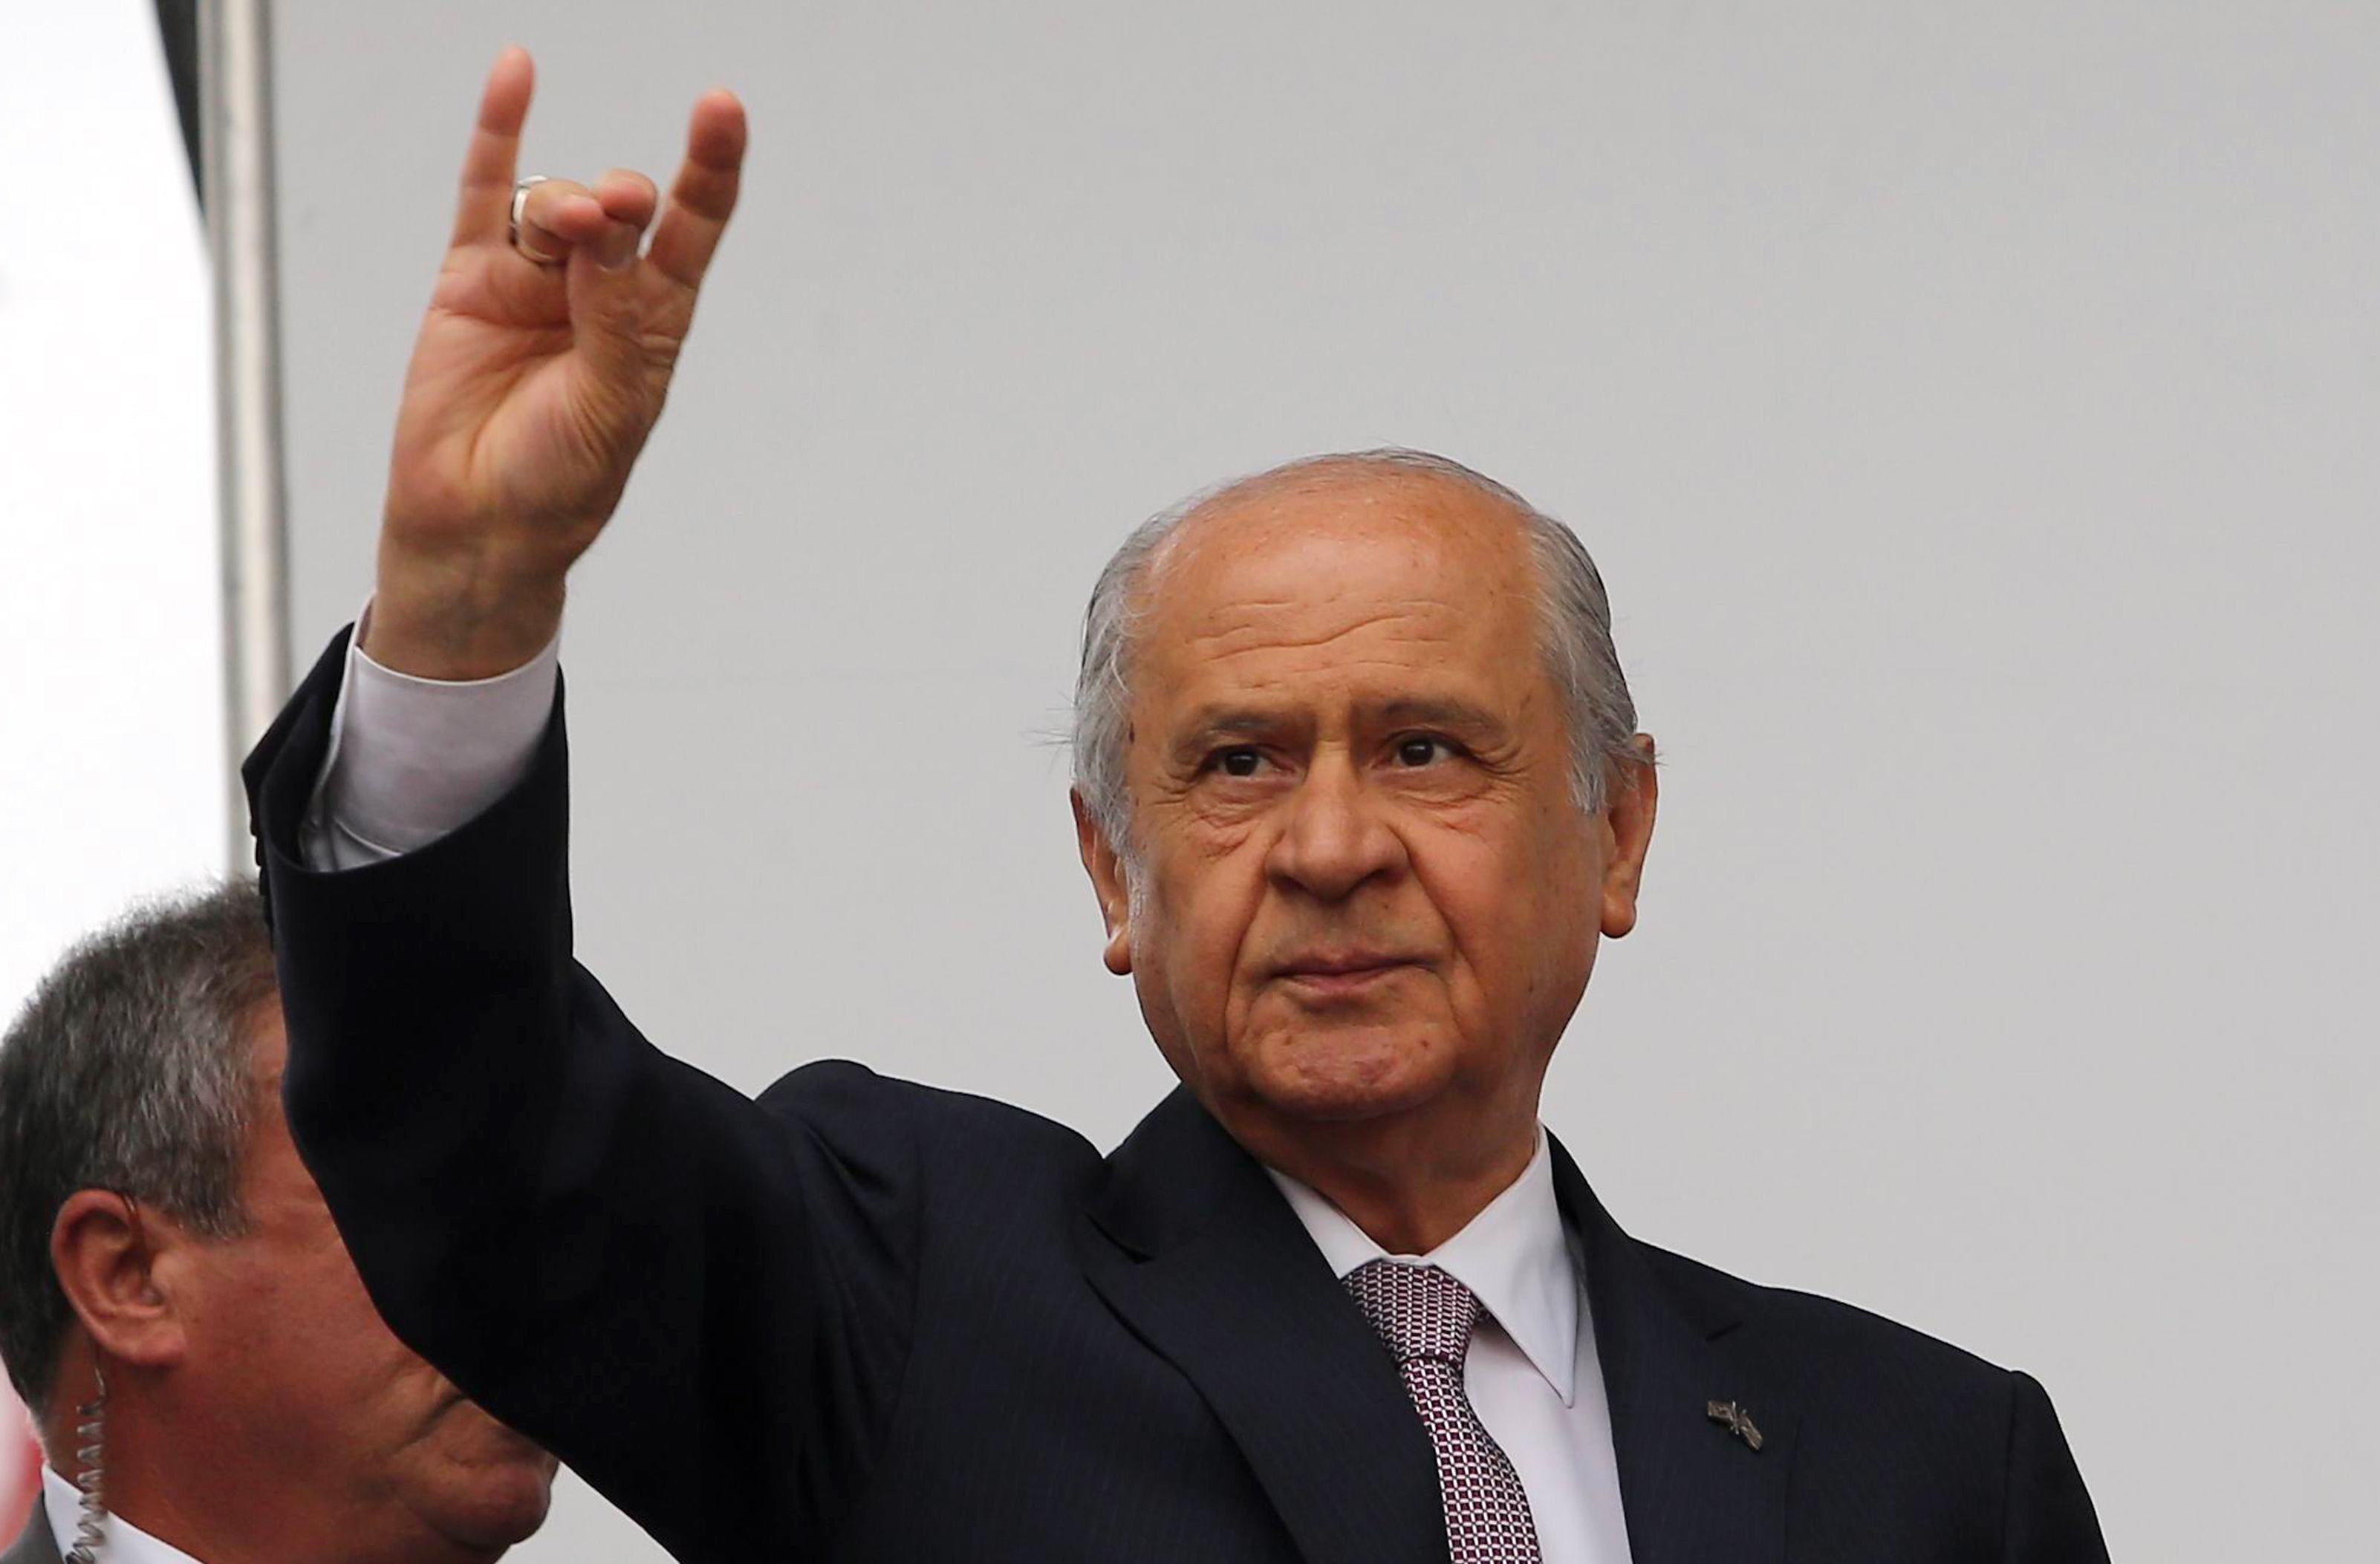 Turkey's opposition leader of the Nationalist Action Party (MHP) Devlet Bahceli gestures the "Grey Wolves" sign during an election rally on May (AFP)